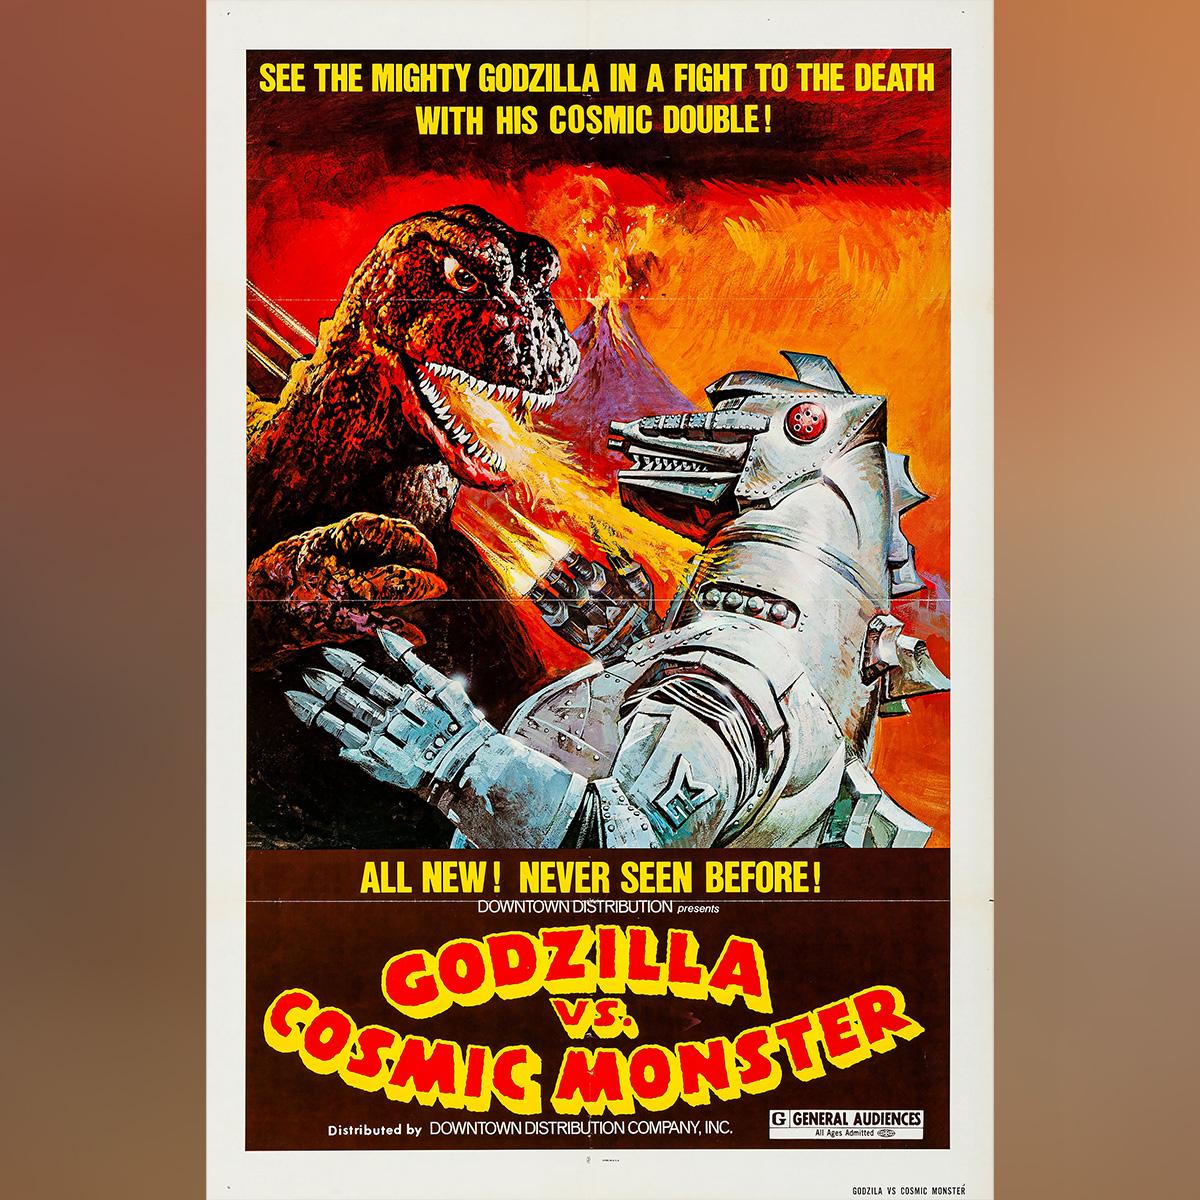 Godzilla appears to be rampaging across Japan. However, this is not Godzilla but a space titanium robot built by ape-faced aliens who want to conquer the Earth. The real Godzilla teams up with King Seesar, a legendary creature that guards Japan and